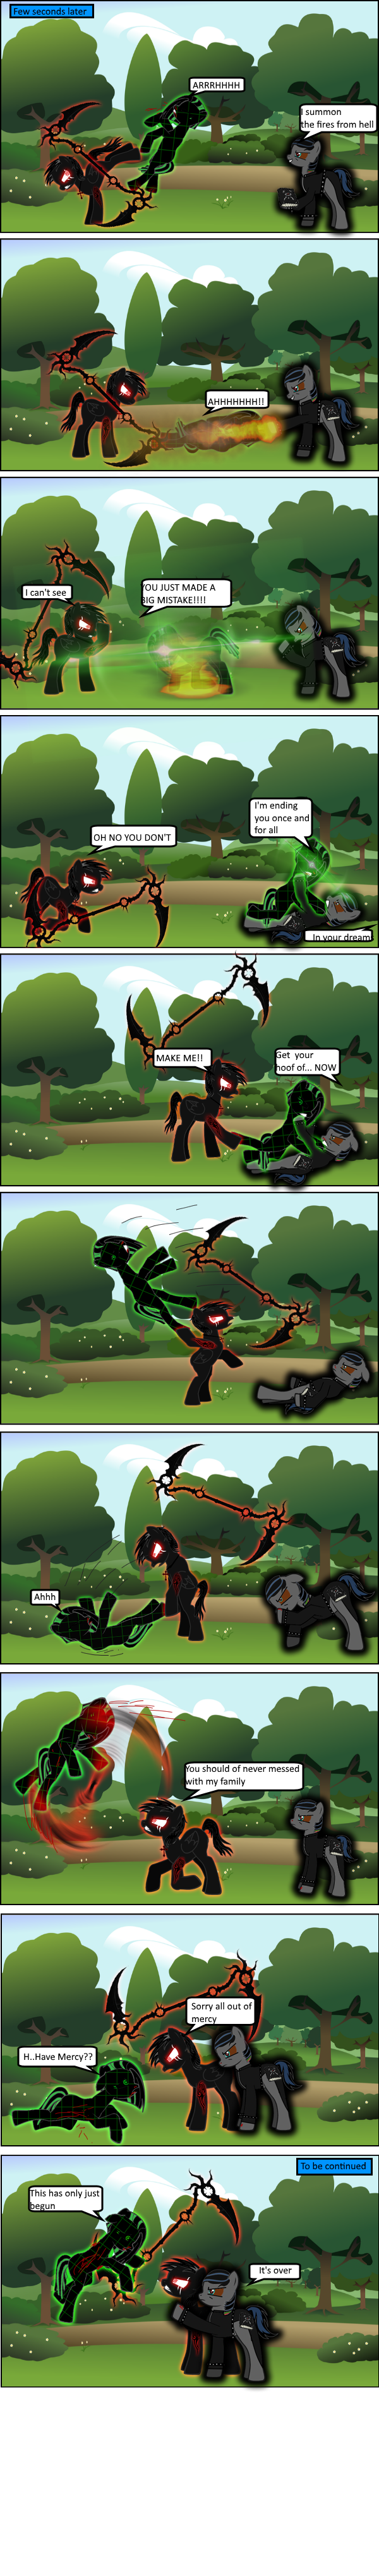 Page 4 - The Battle Begins